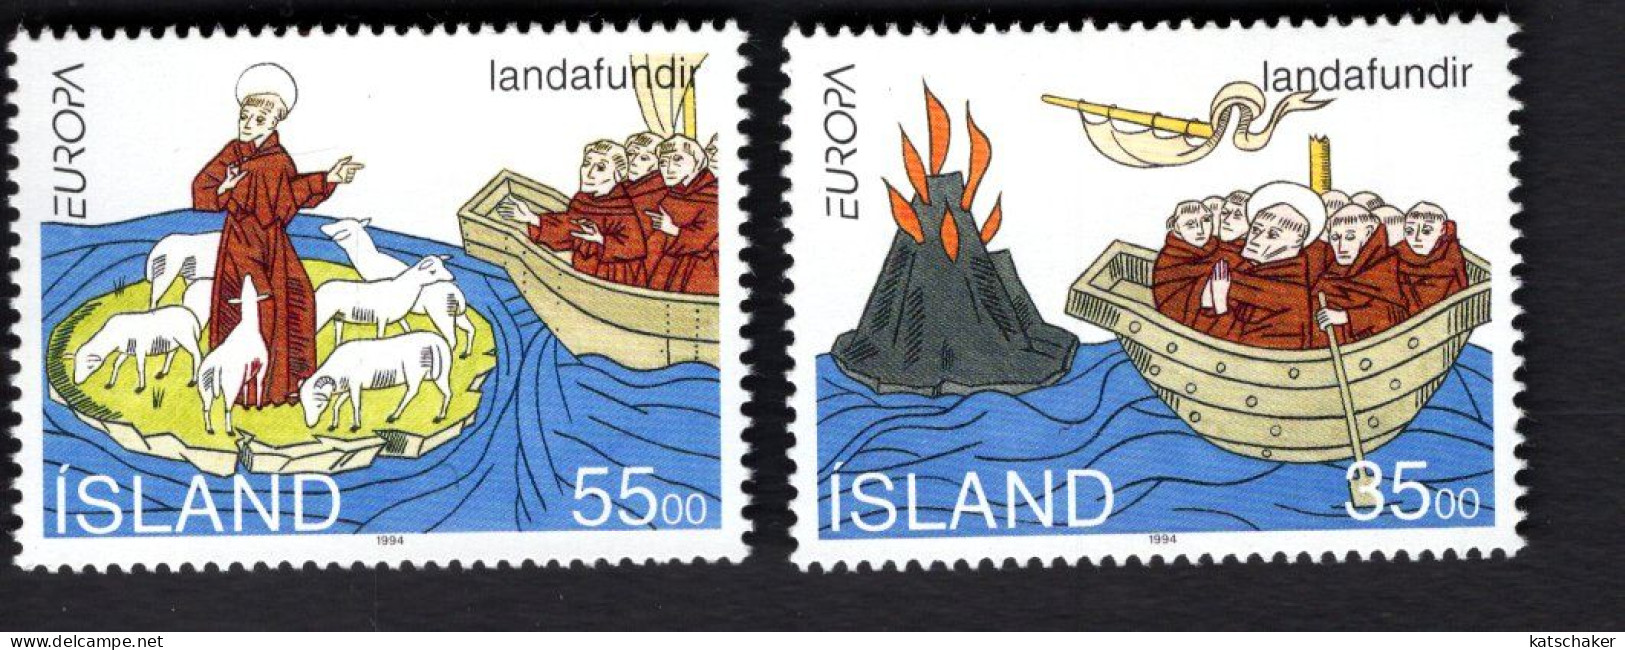 2021745251 1994 SCOTT 780 781 (XX)  POSTFRIS MINT NEVER HINGED - EUROPA ISSUE -  VOYAGES OF ST. BRENDAN - Nuevos